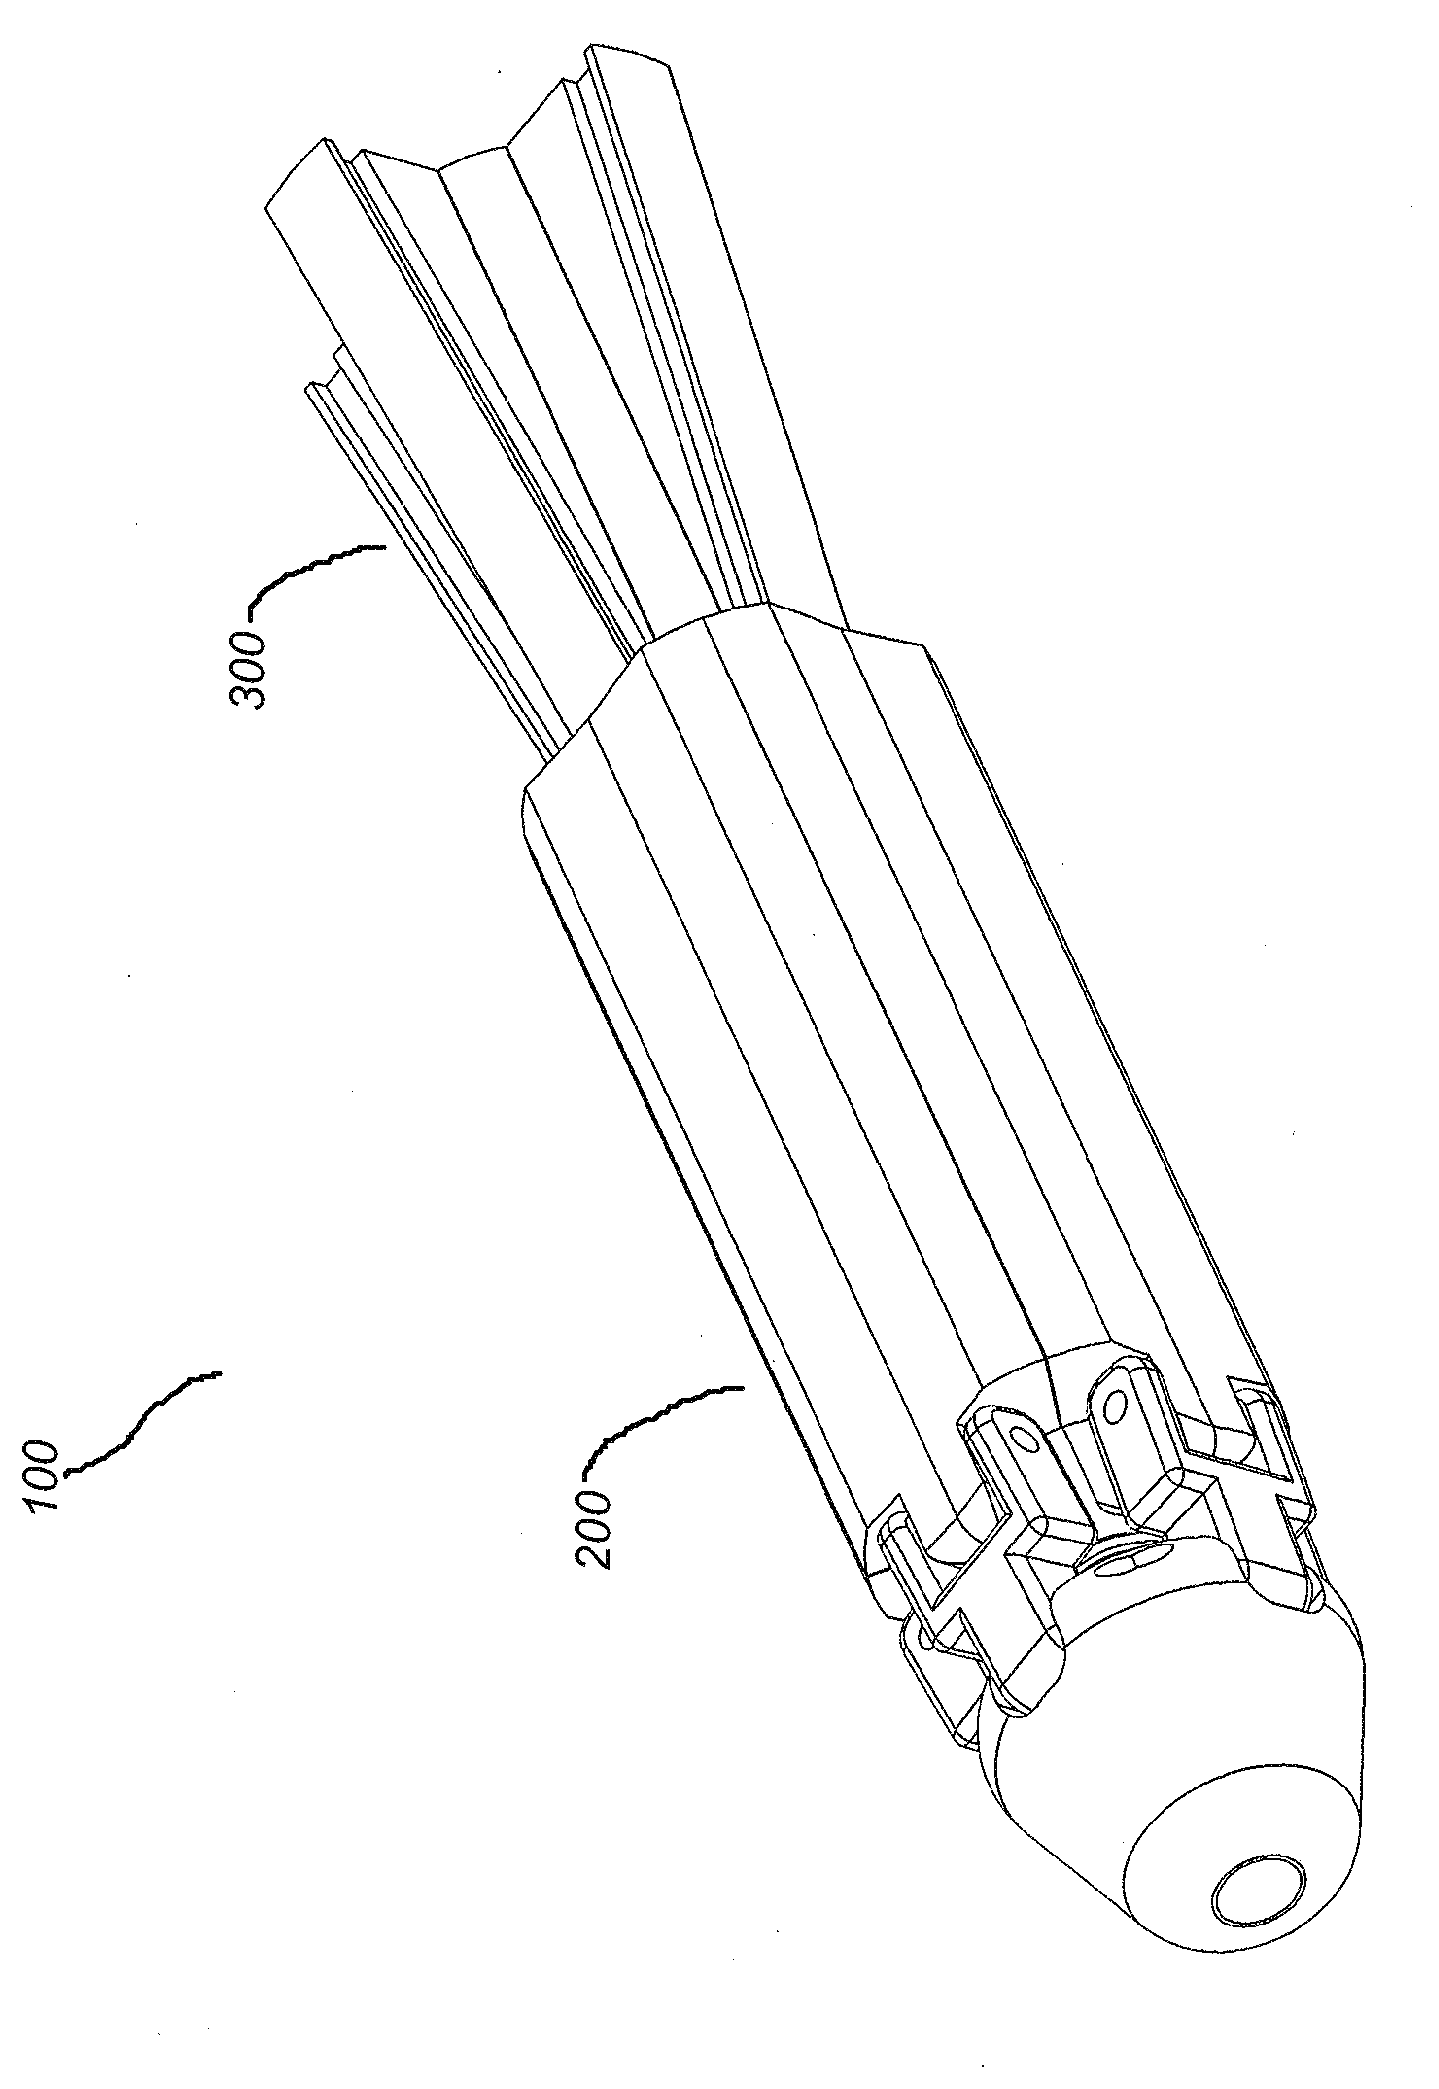 System and method for securing tissue to bone